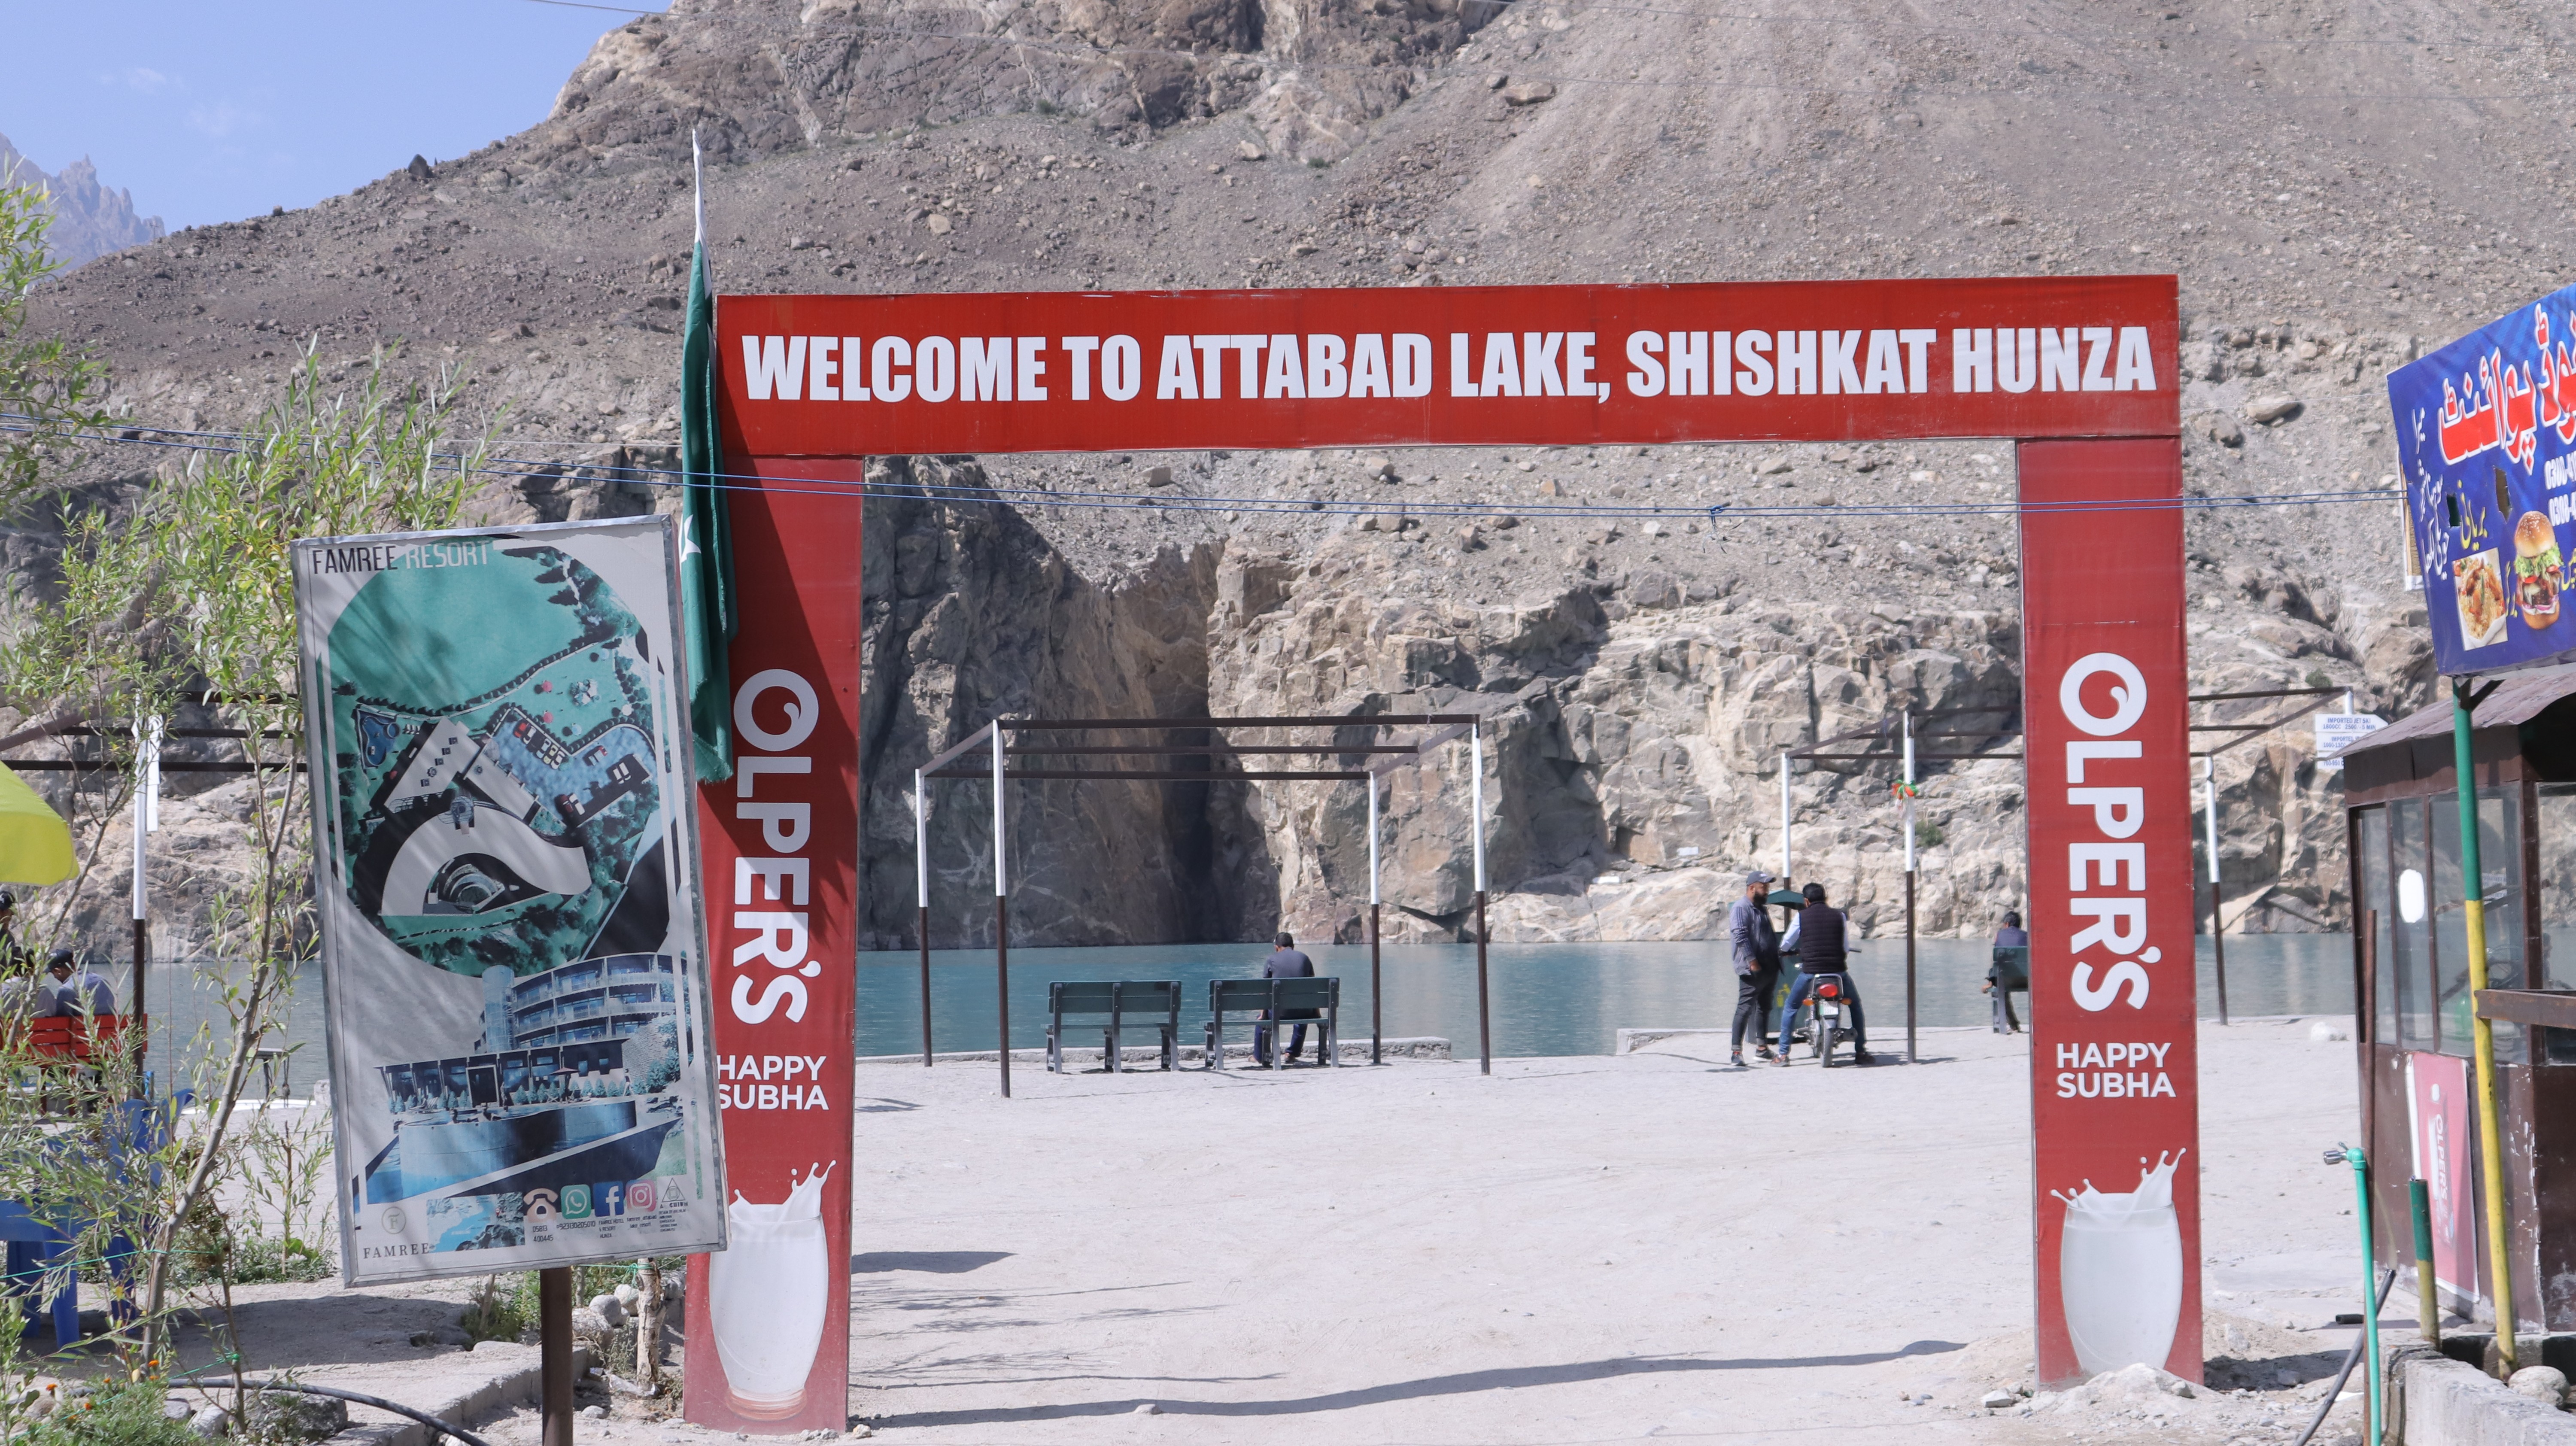 the main entrance point of attabad lake